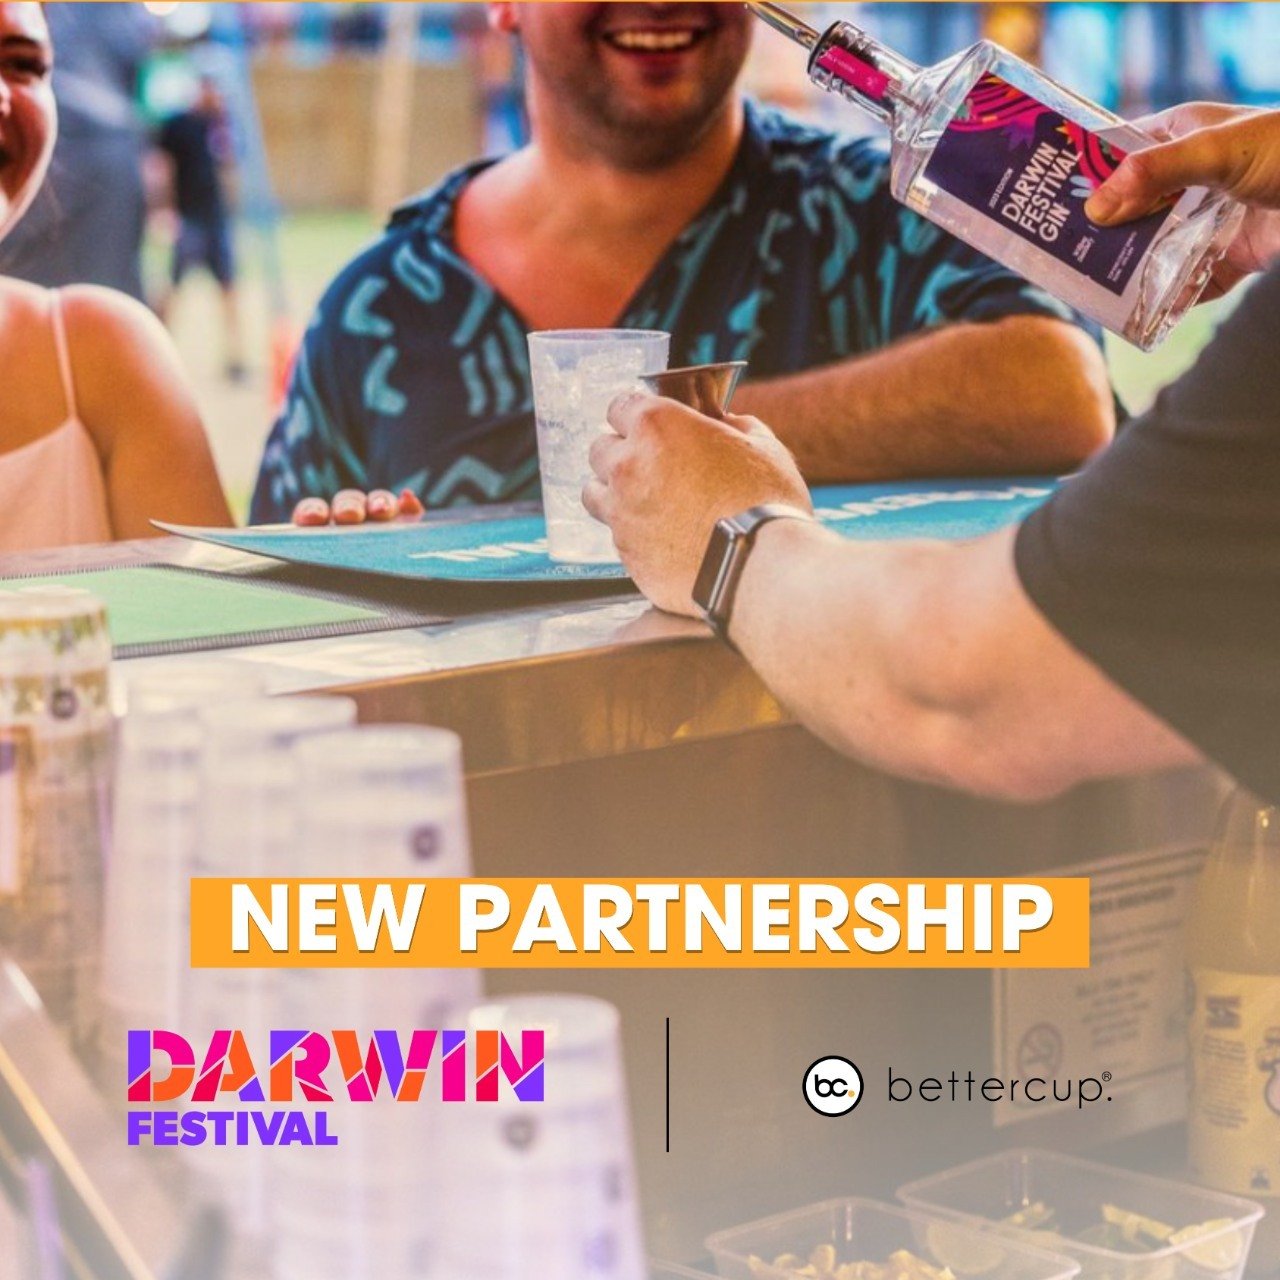 We are thrilled to announce our partnership with Darwin Festival for this year's event! This marks our 4th YEAR of collaborating with the Darwin Festival since we began in 2021! 🥳🎊

Our shared commitment to sustainability and environmental responsi